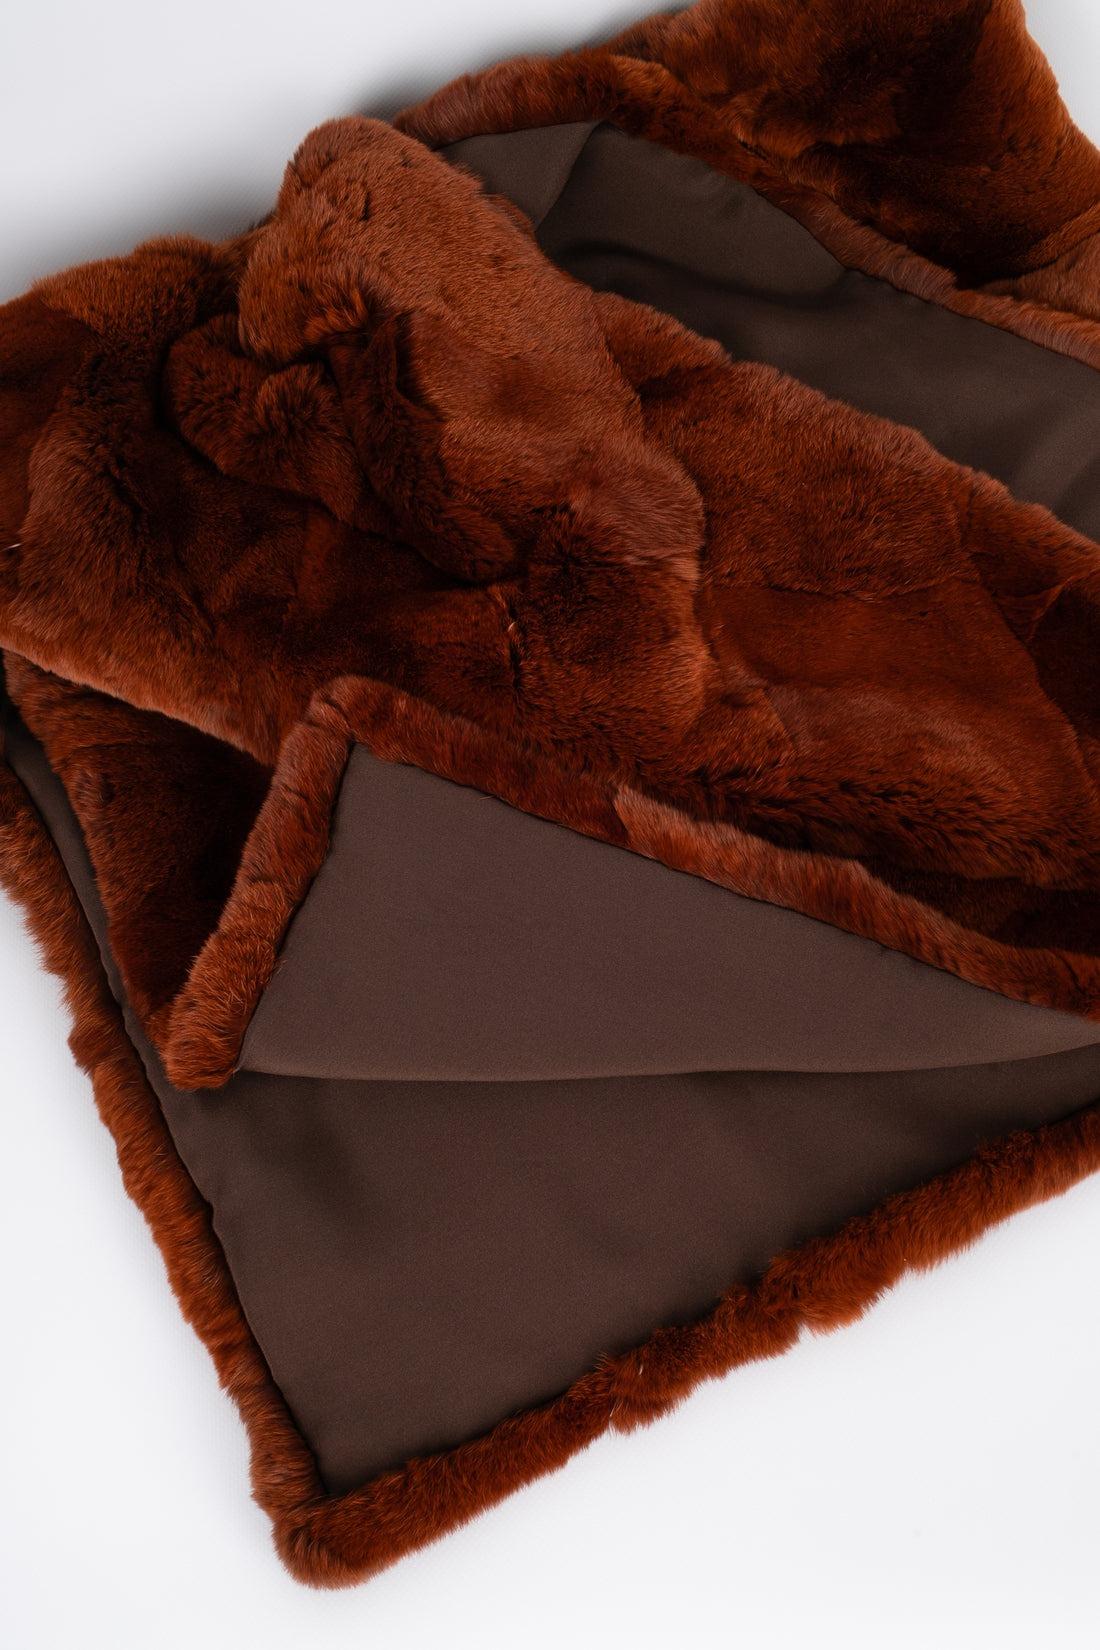 Chanel Fur Large Stole in Copper-Brown Orylag with a Brown Silk Lining For Sale 3